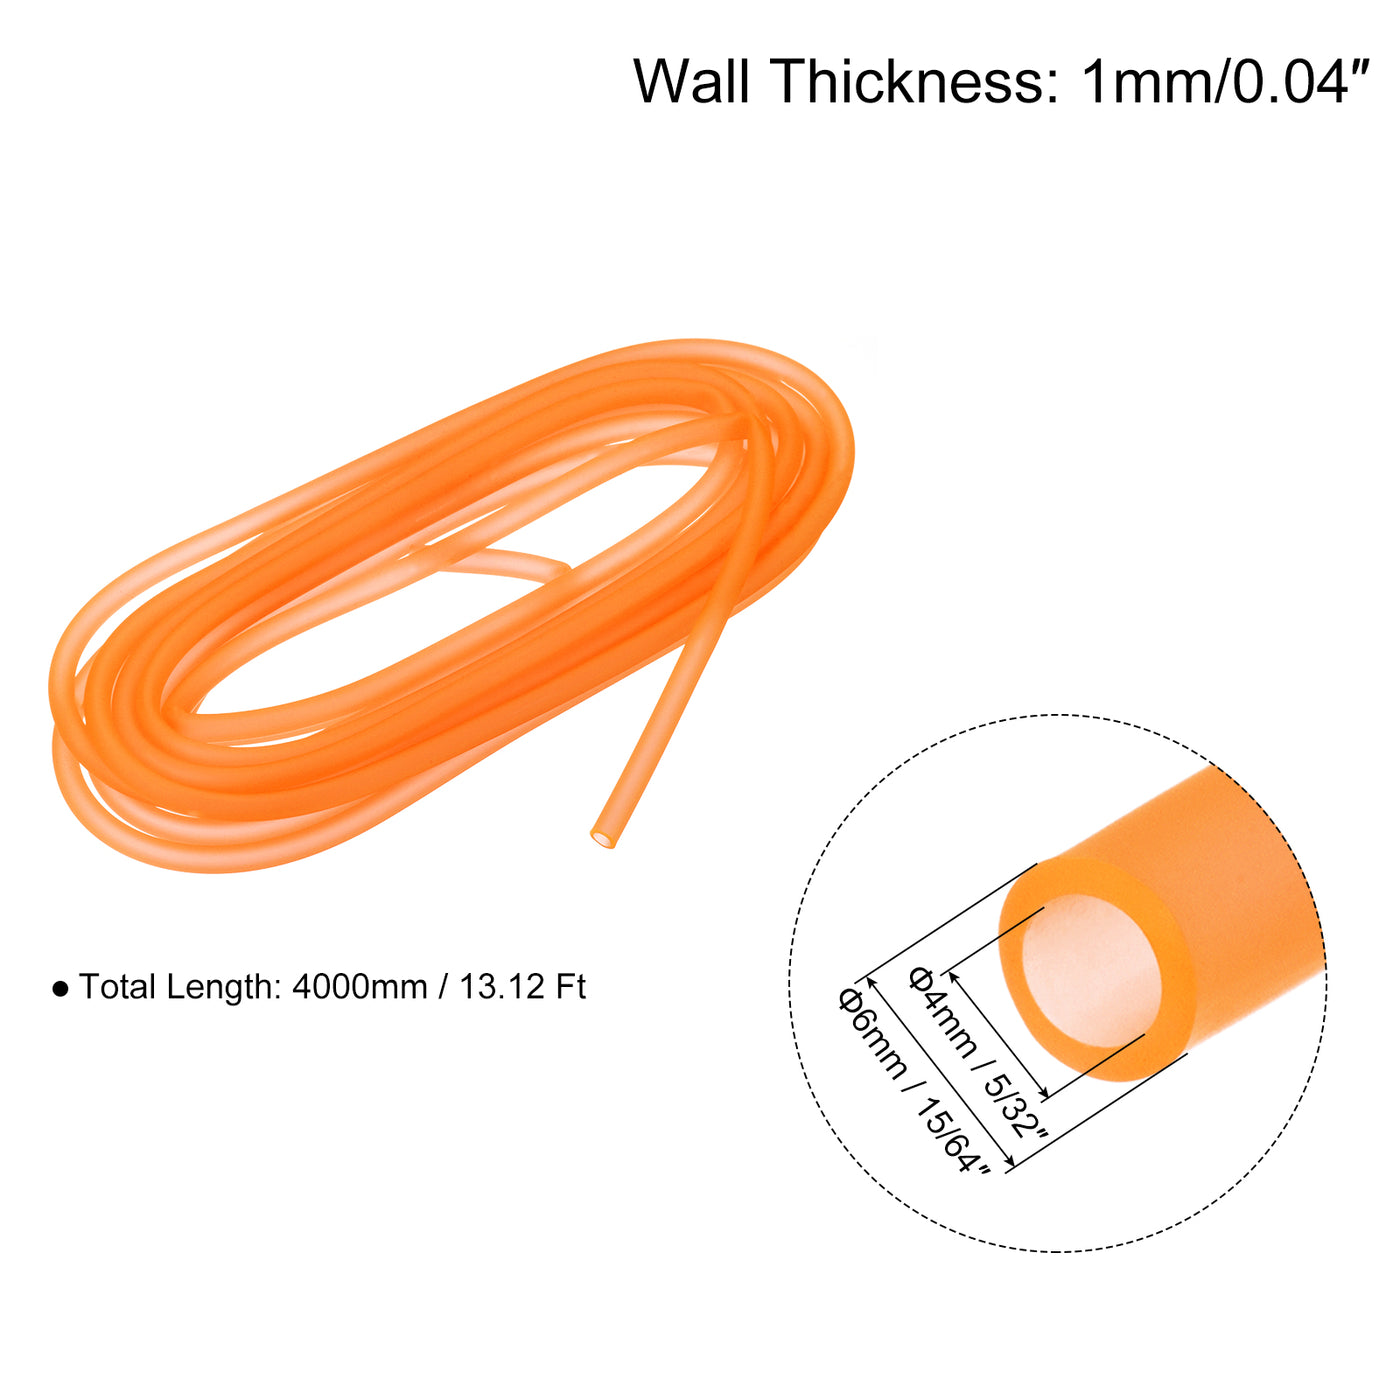 uxcell Uxcell Silicone Tubing 5/32" ID, 15/64" OD 1Pcs 13.12 Ft for Pump Transfer, Orange